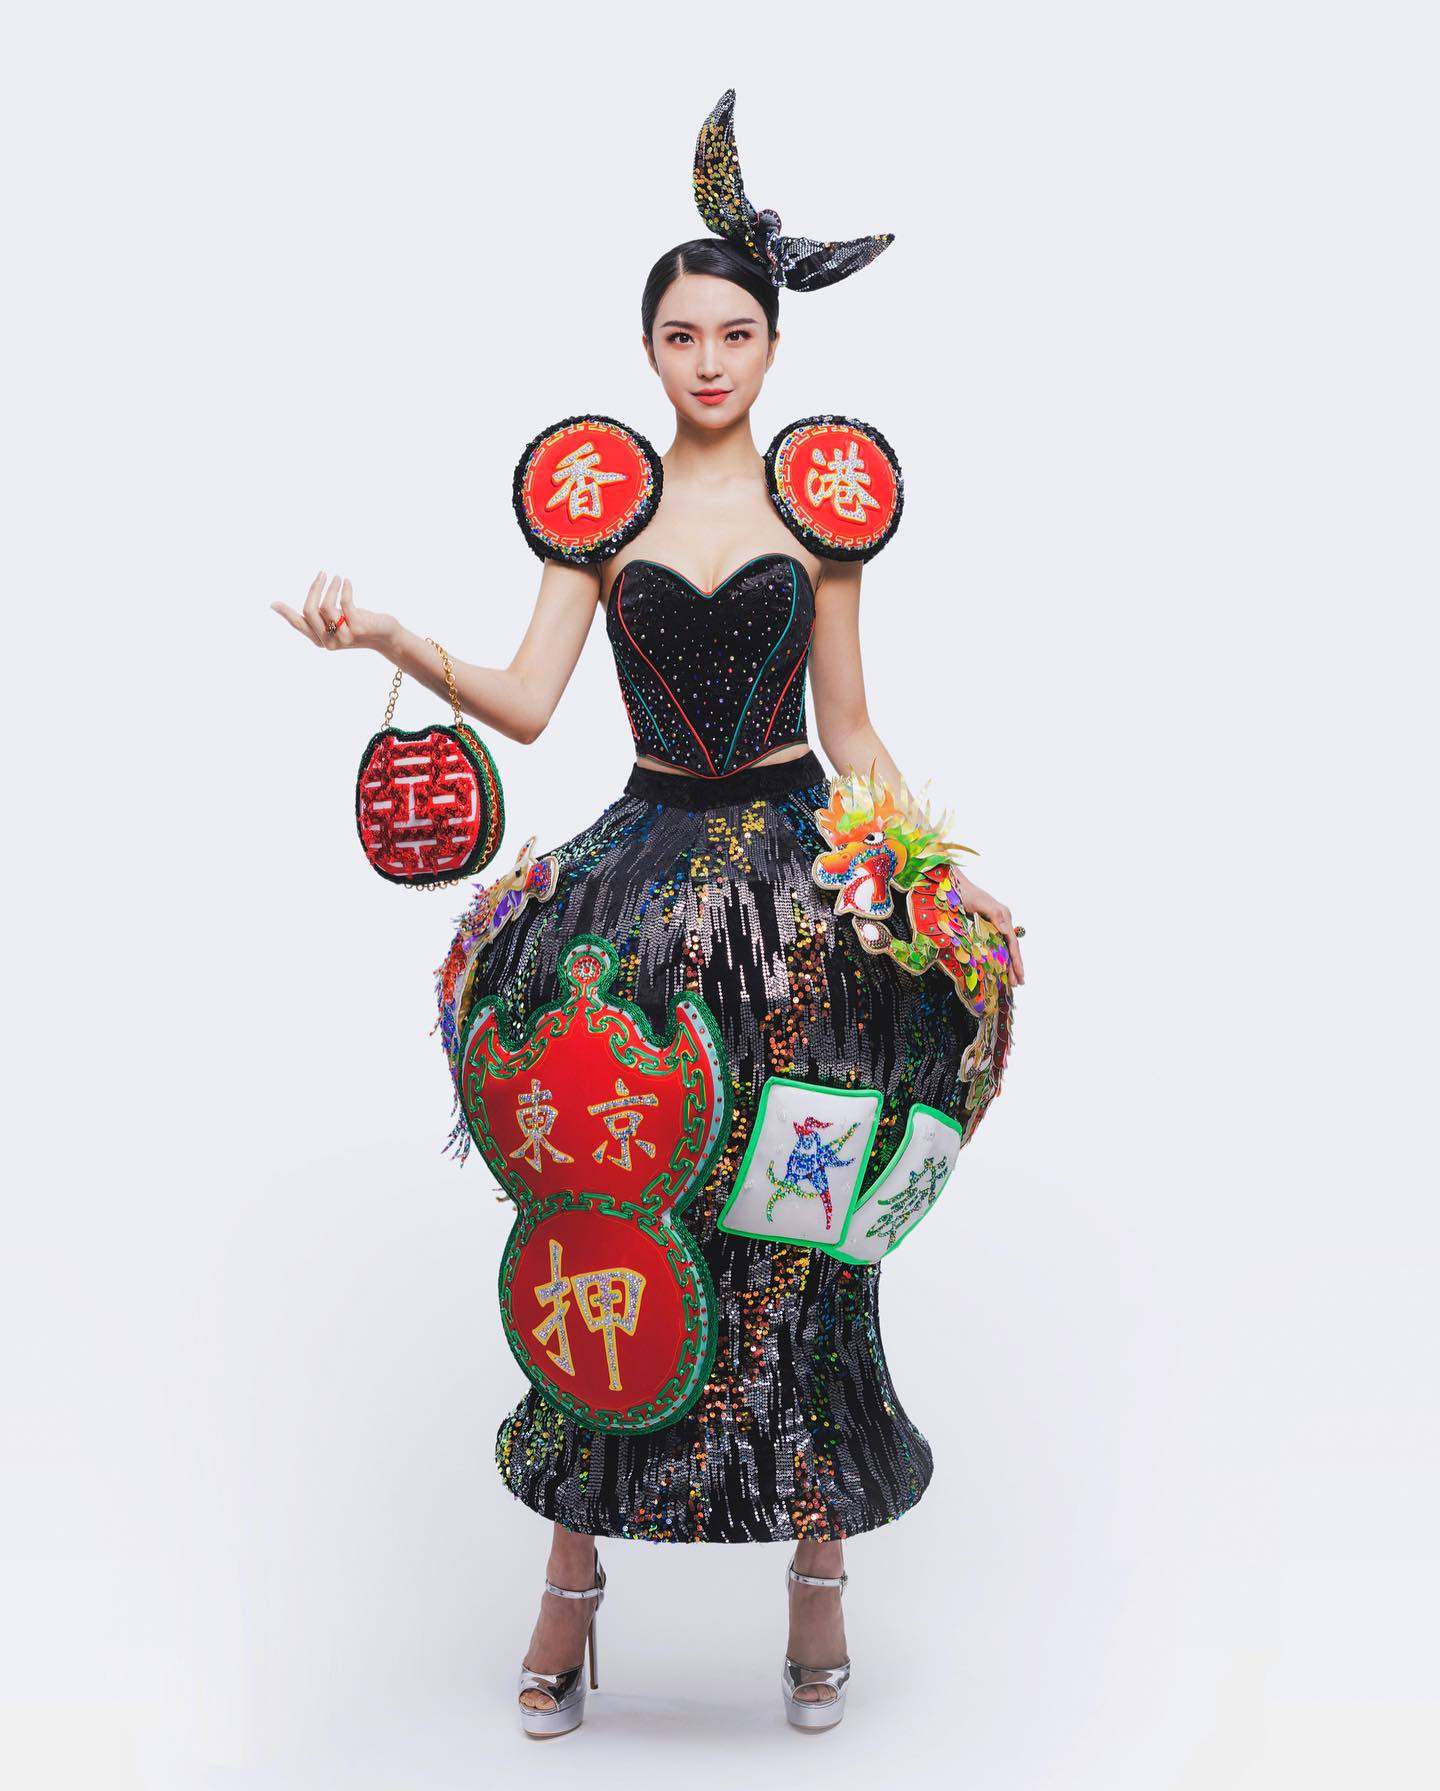 Miss International Hong Kong 2023 Verna Leung models the “national costume” to be worn at the event in Tokyo that was designed by seven students from the Hong Kong Design Institute. Some netizens say it reminds them of a character from the Japanese anime “Demon Slayer”. Photo: Facebook / @Miss International Hong Kong